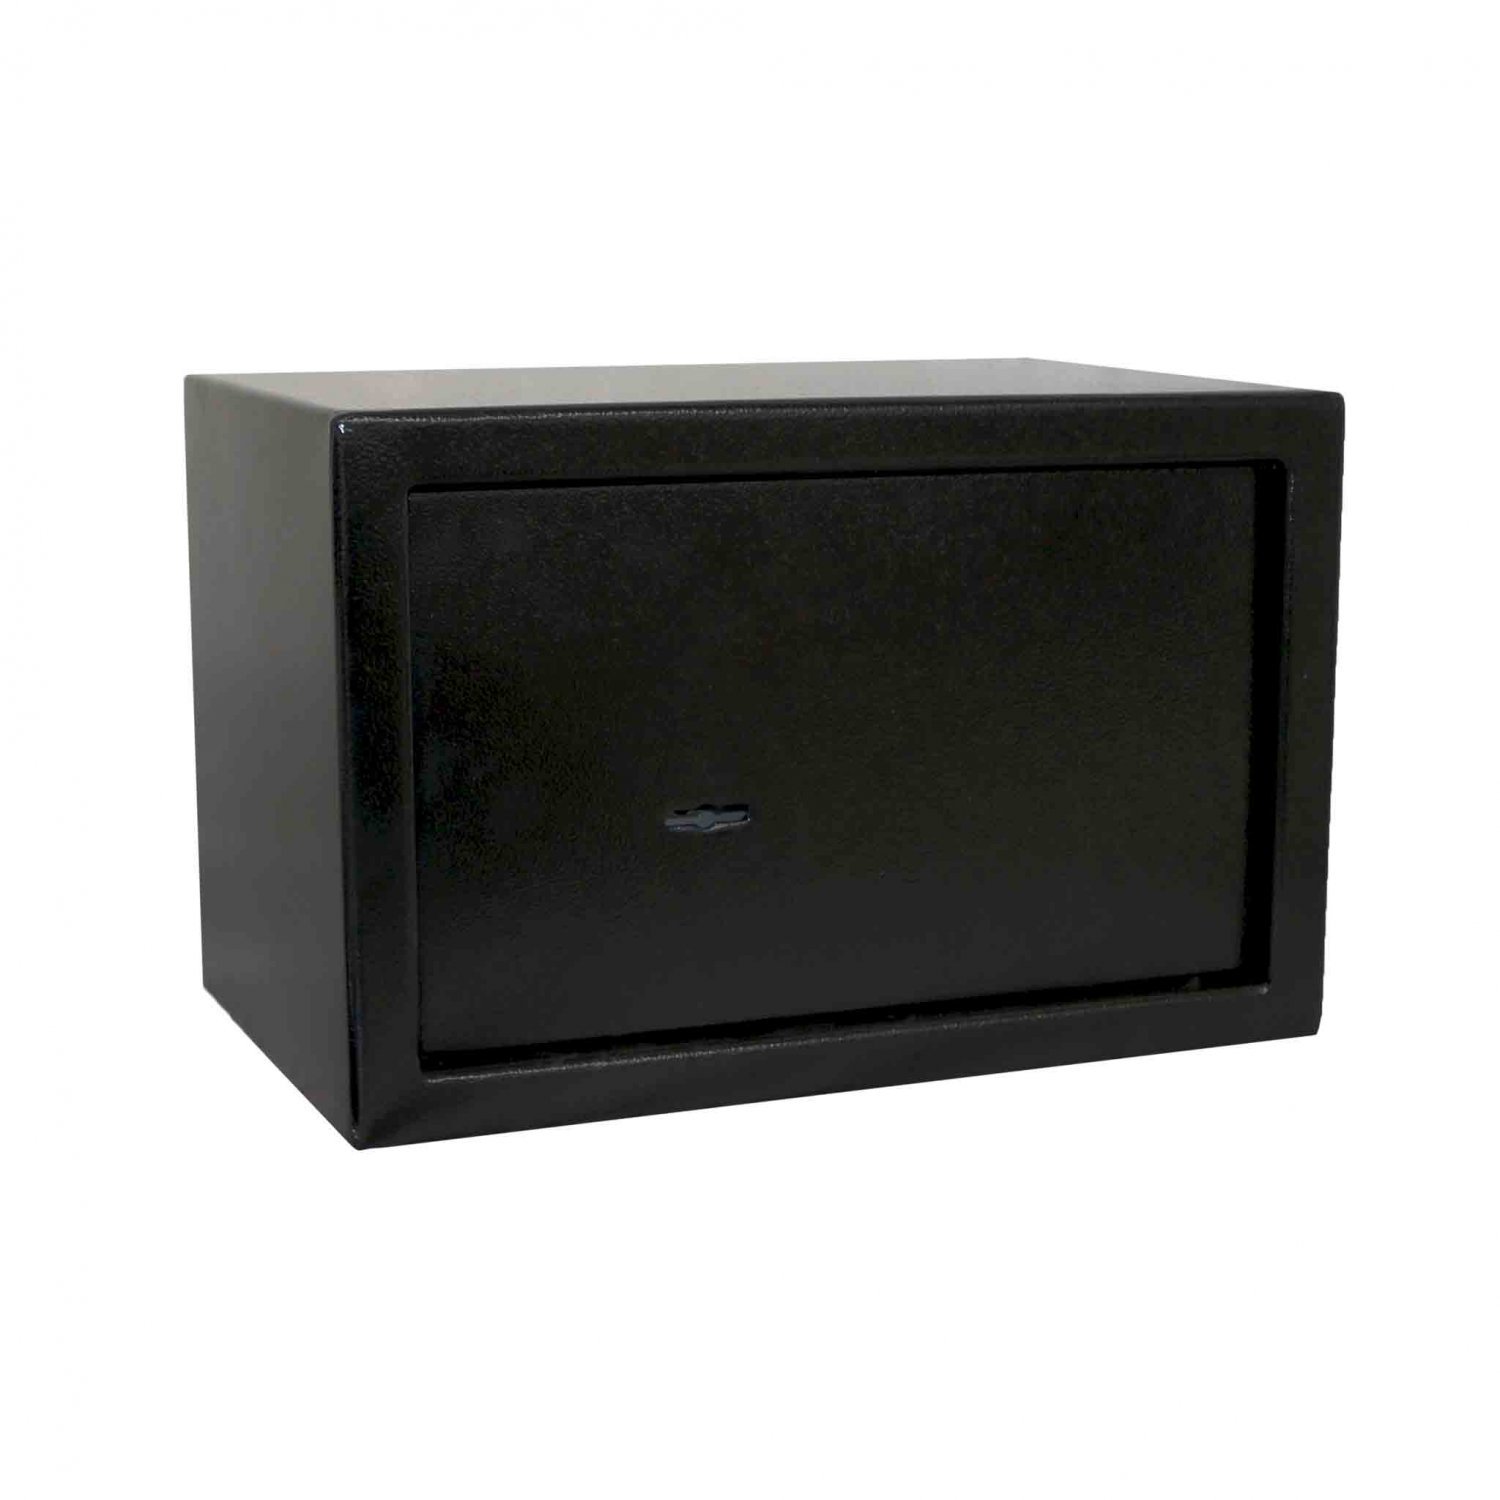 10L Key Operated Steel Safe Box Security Home Office